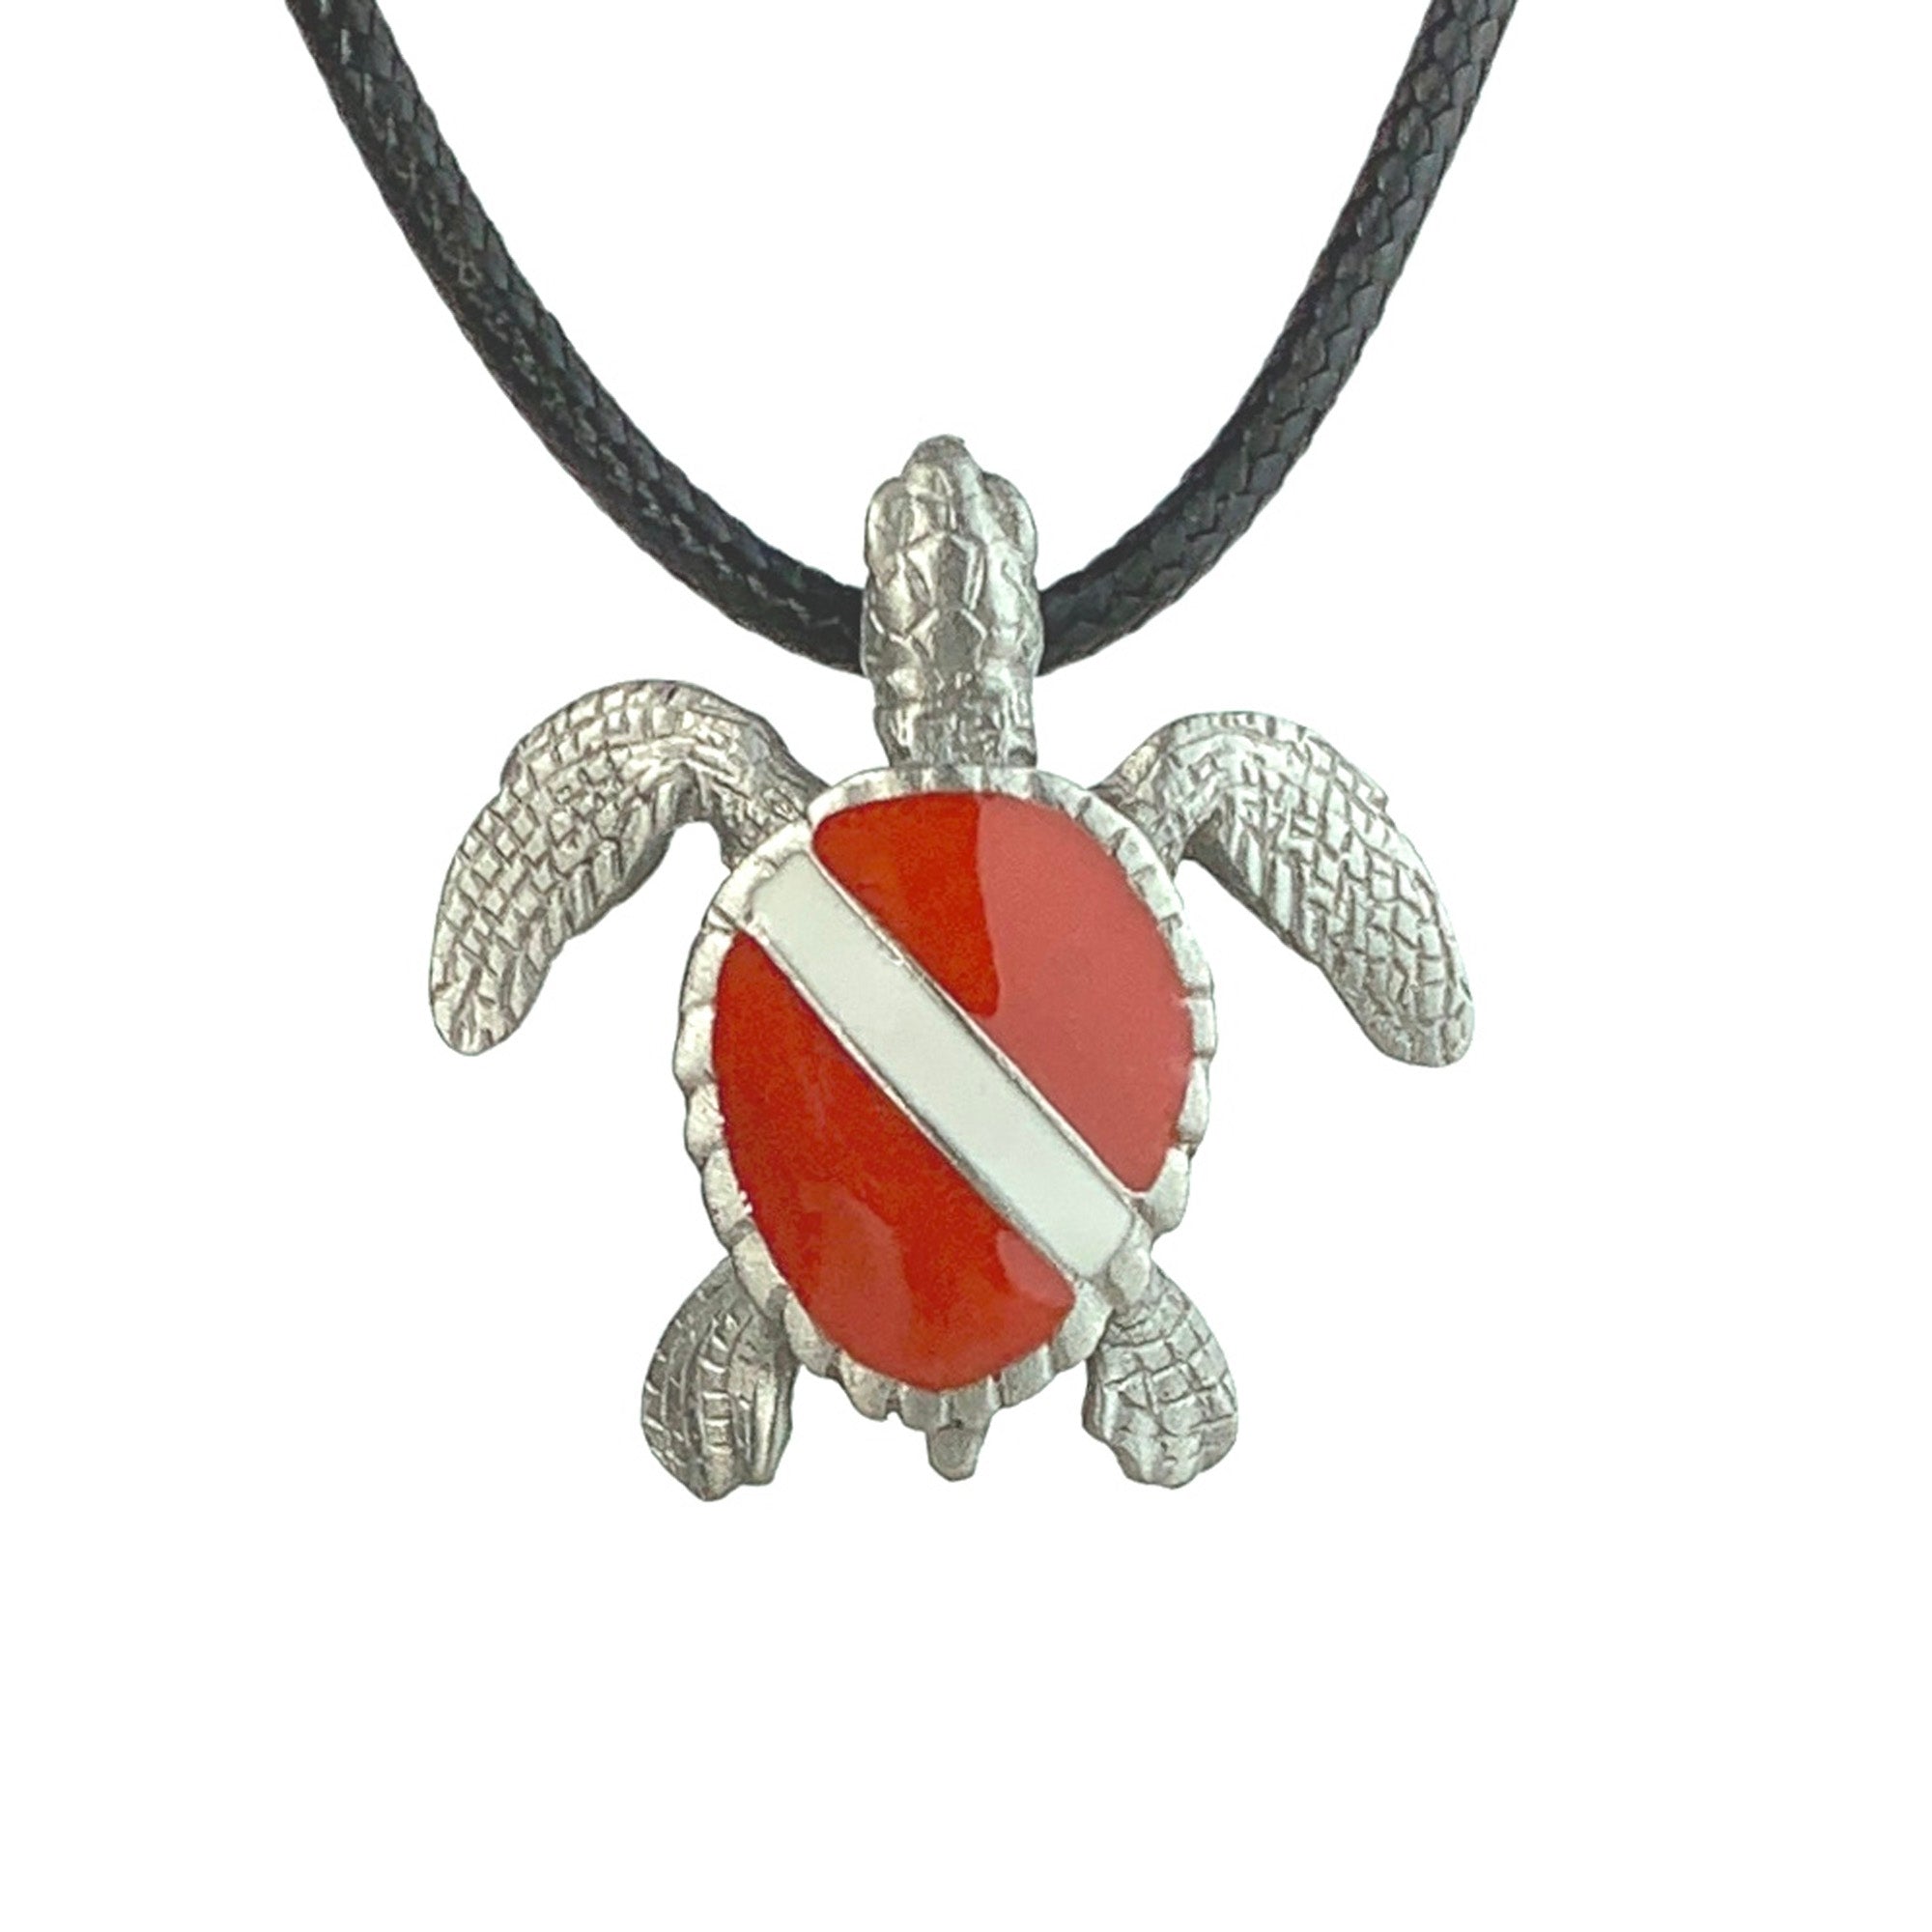 Coral Jewelry as a Magnificent Type of Jewelry from the Sea